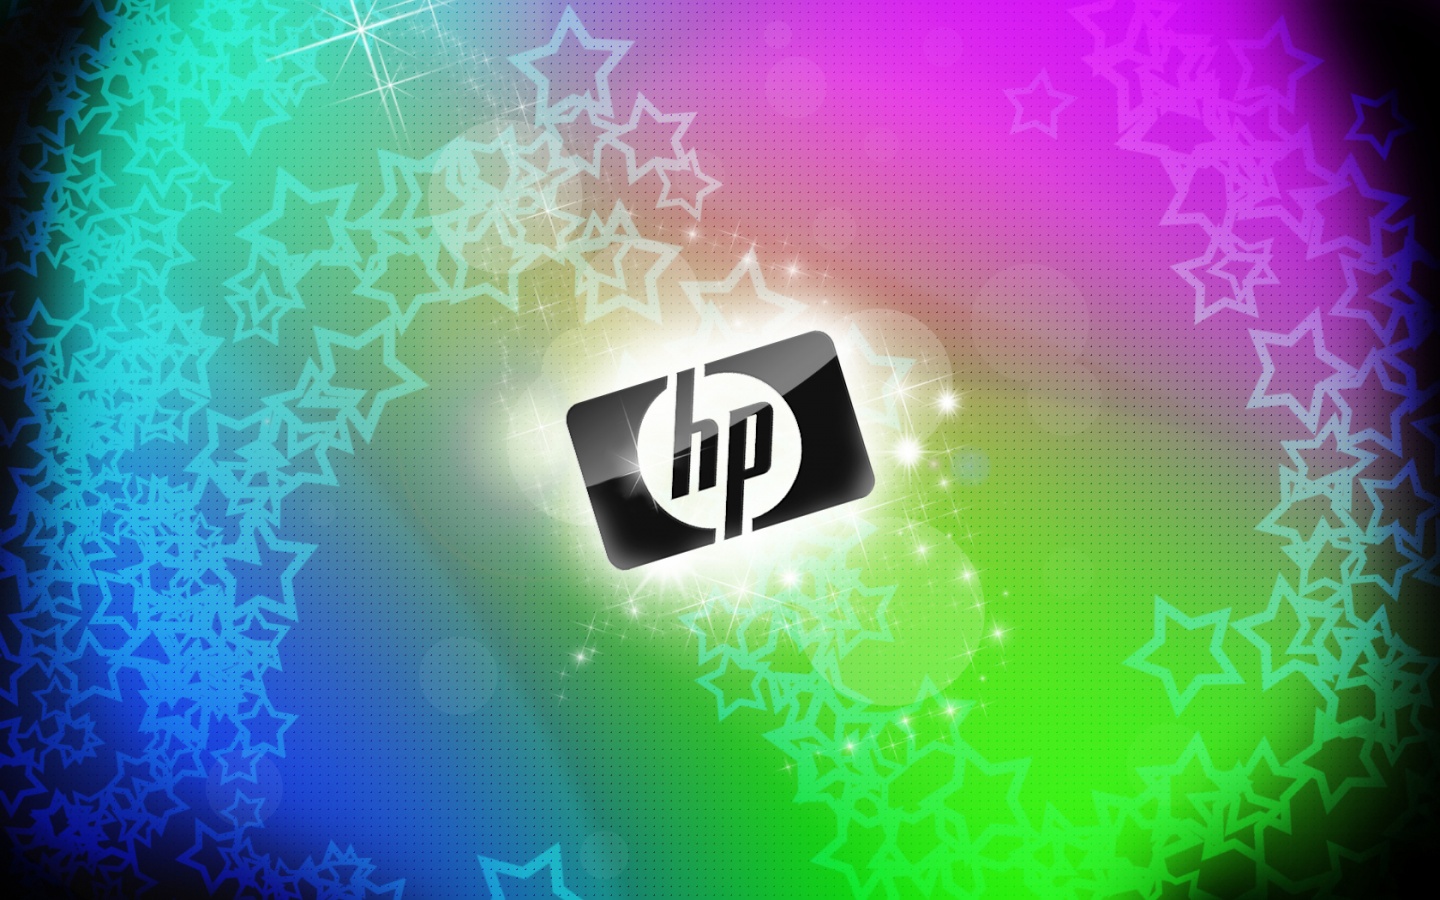 hp electronics wallpaper hp logo picture Popular Pictures